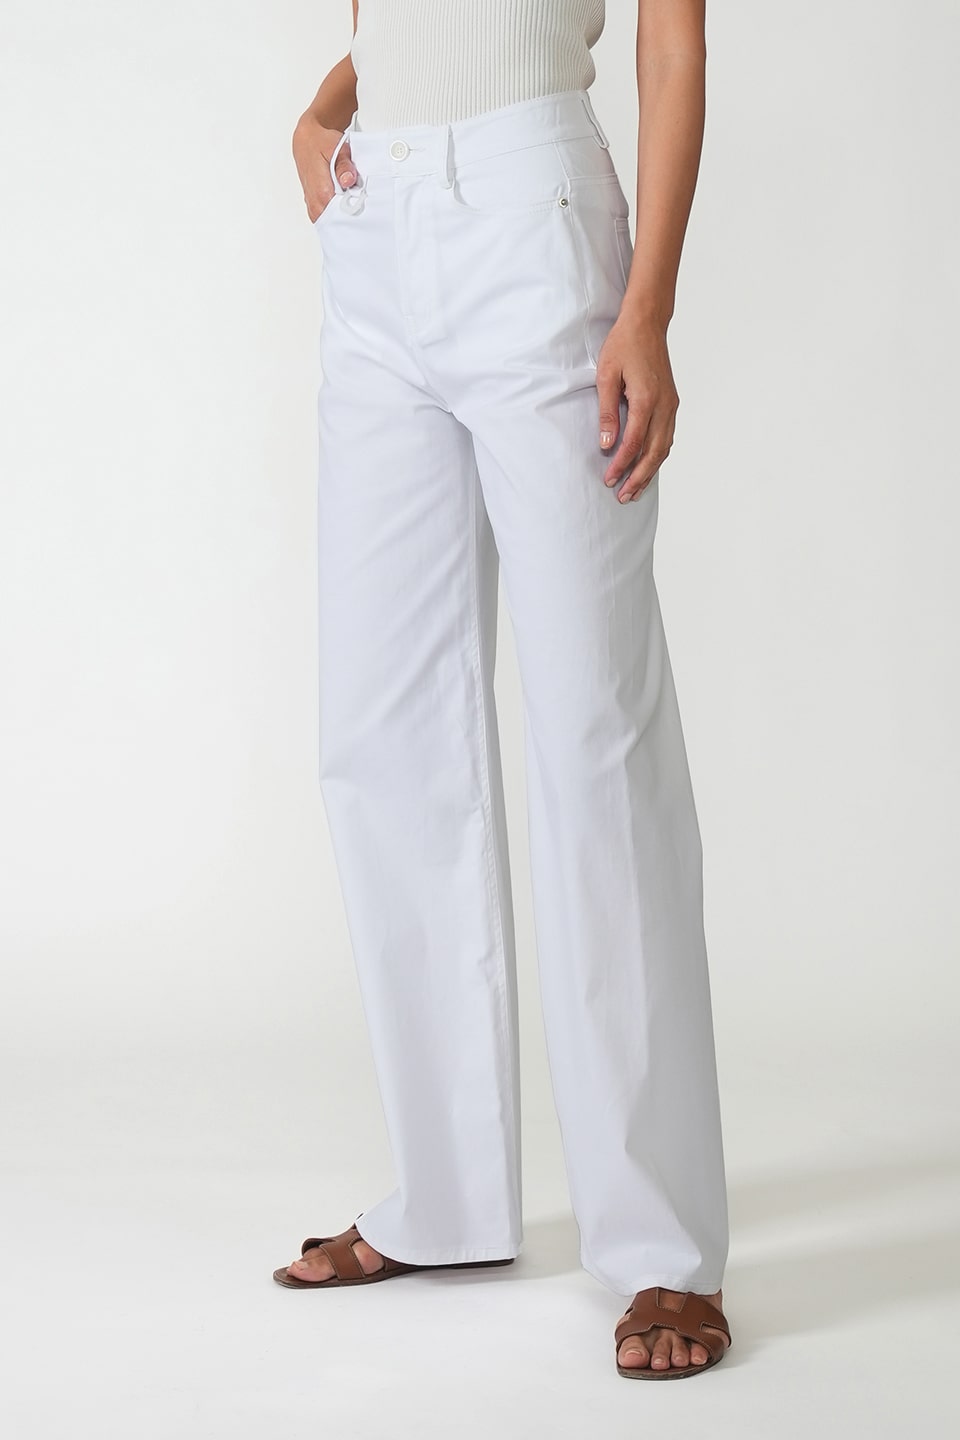 Designer White Women pants, shop online with free delivery in UAE. Product gallery 2